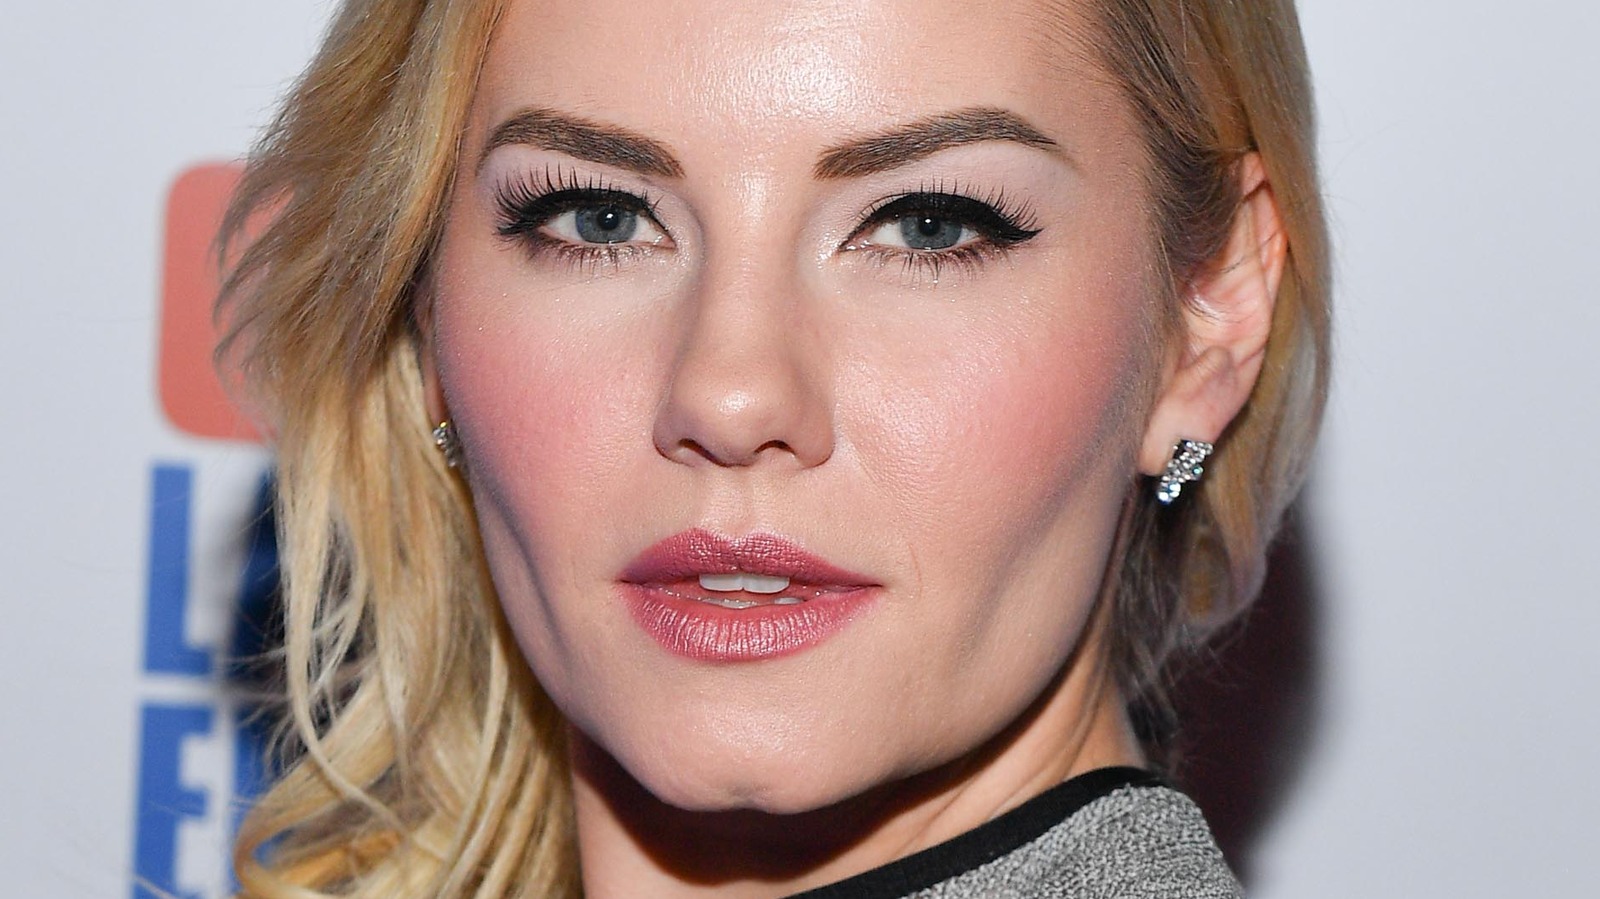 Elisha Cuthbert - Elisha Cuthbert Pushes Back Against Her Risque Reputation In Hollywood